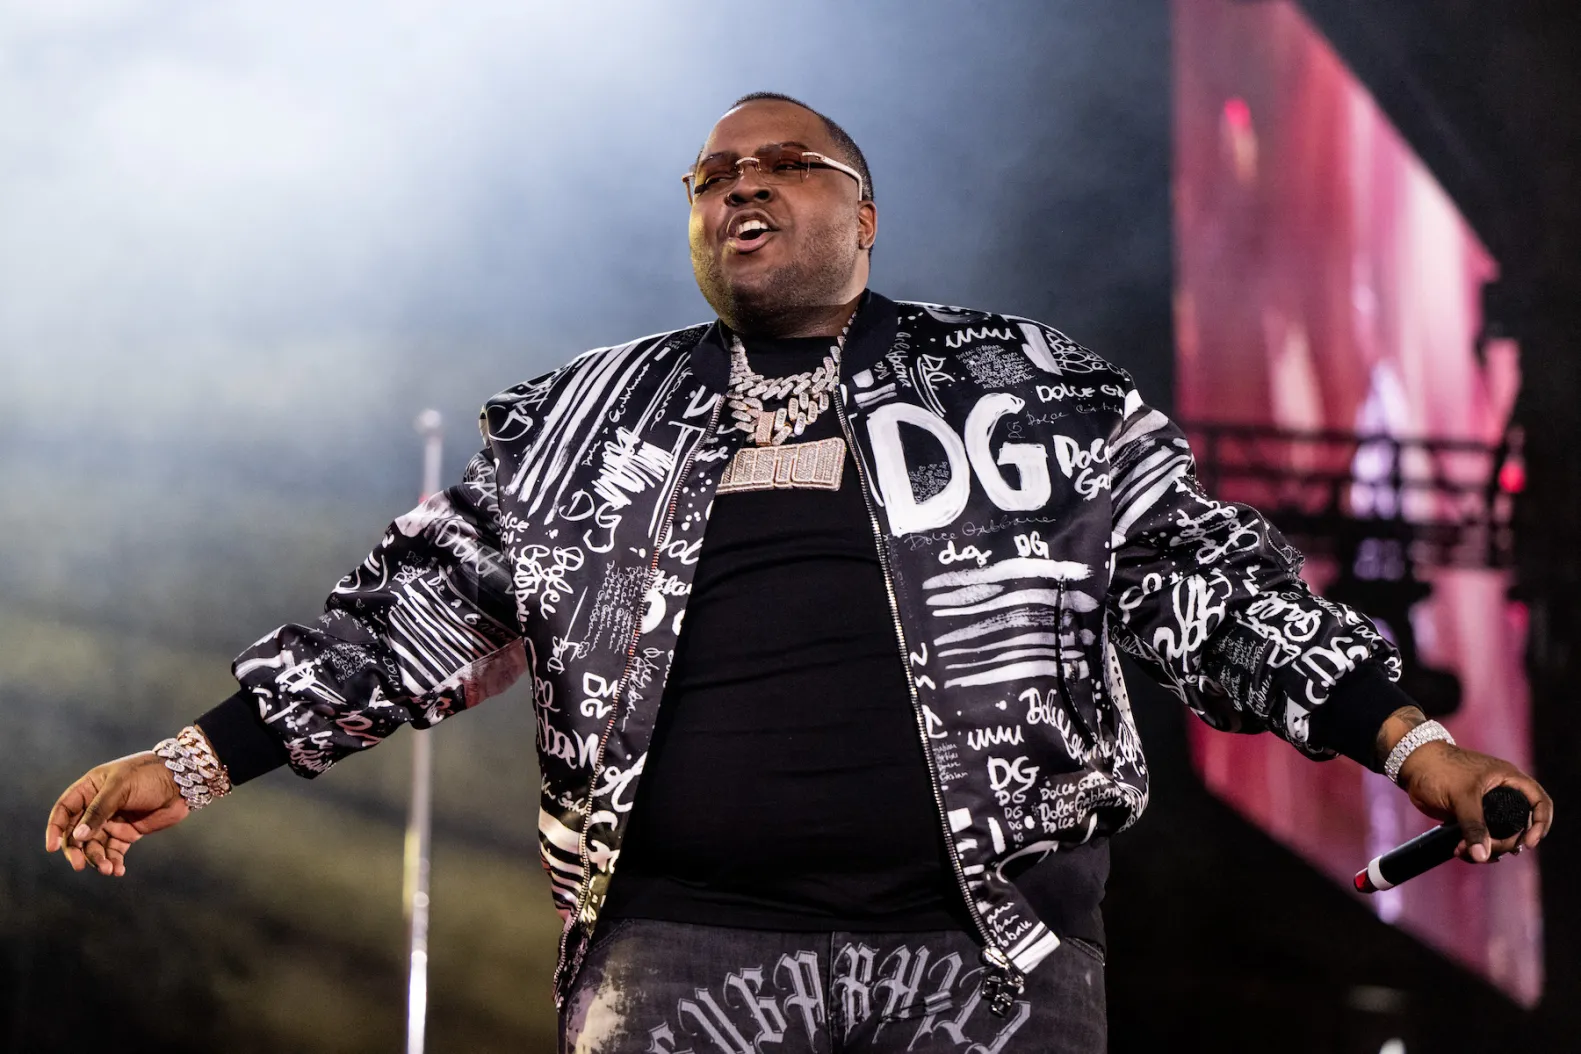 Sean Kingston Arrested in California on Theft and Fraud Charges